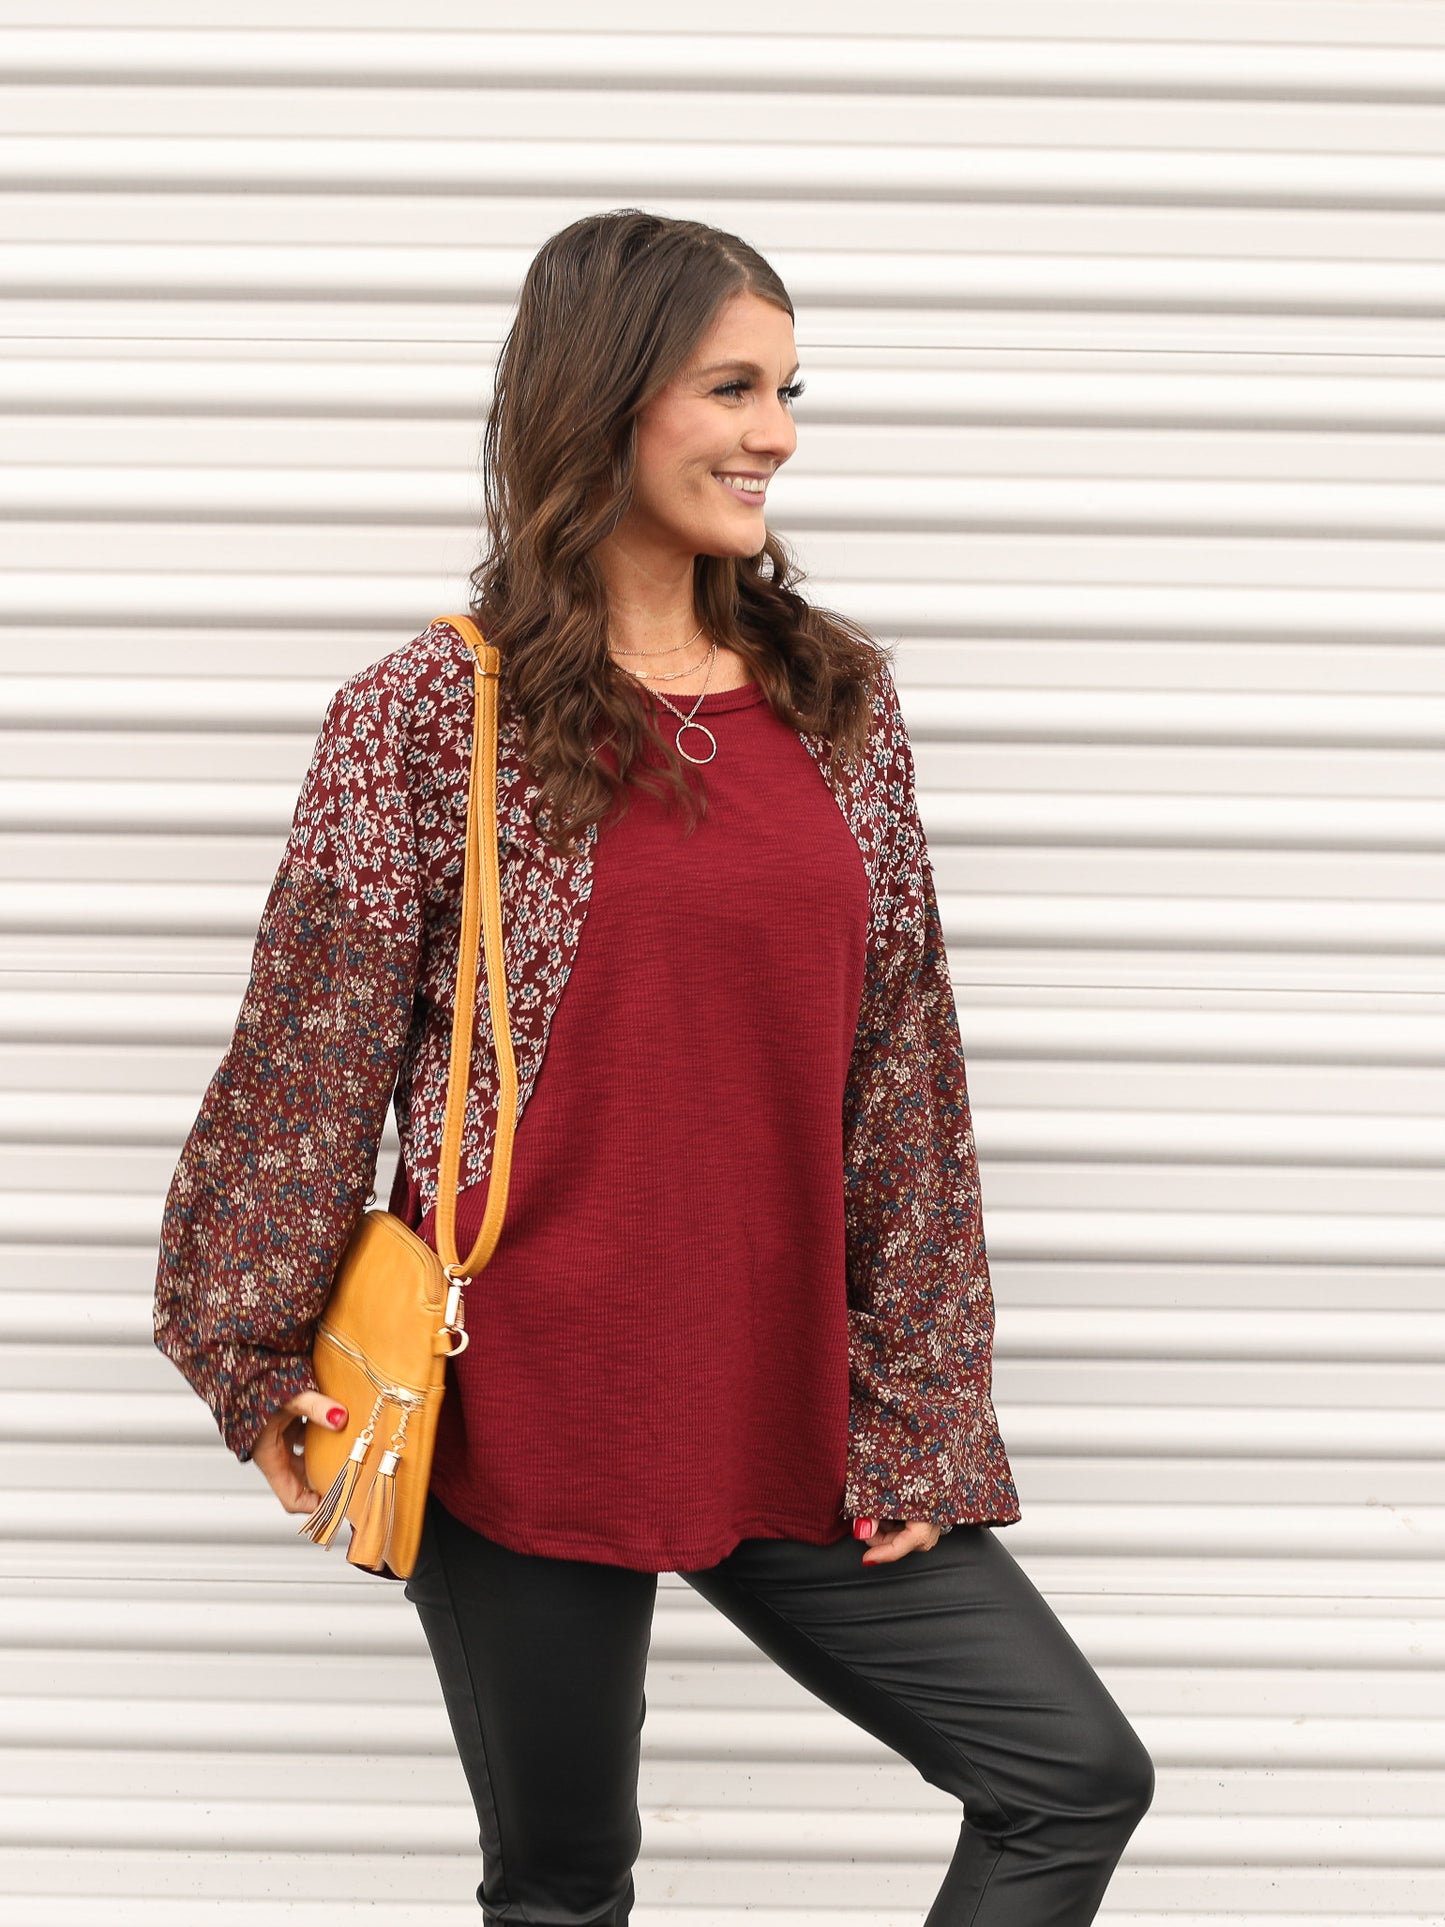 Deep red floral top styled with jeggings and a purse